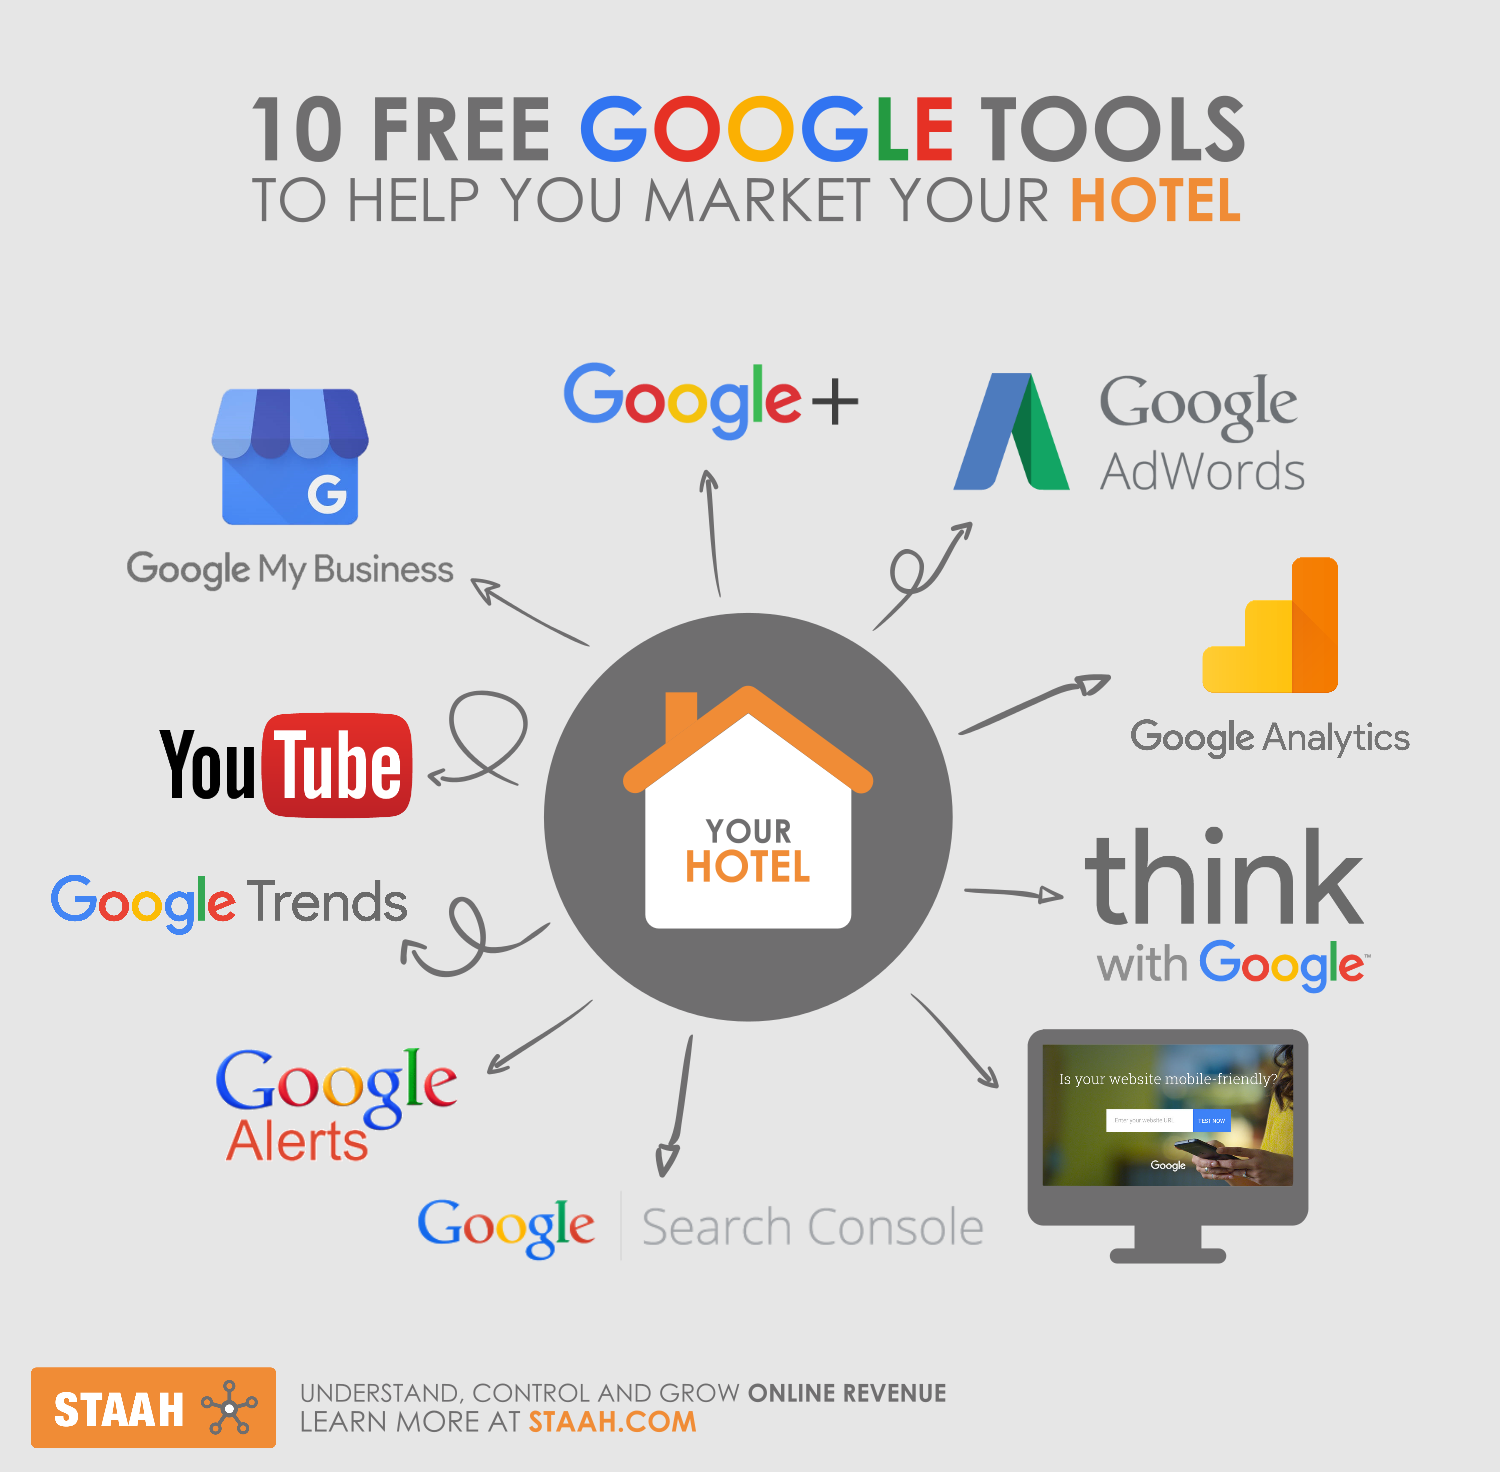 10 Free Google Tools to help you with your Hotel Marketing